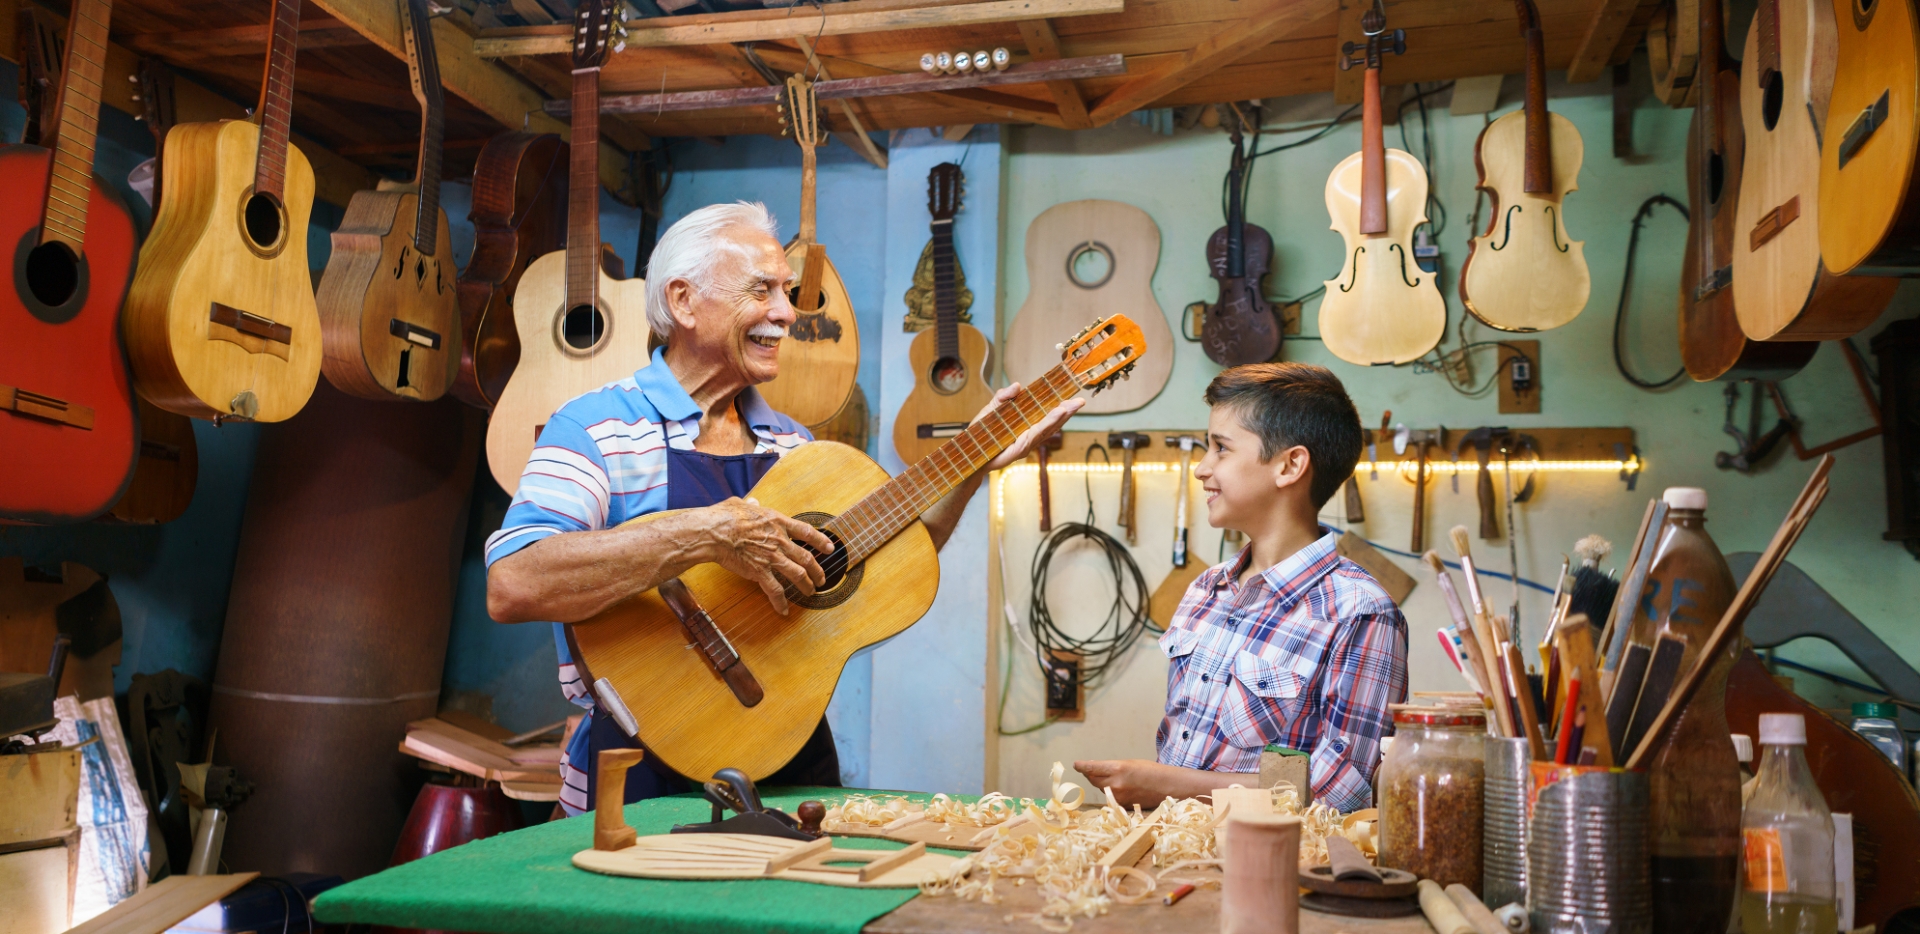 grandfather teaches adolescent grandson how to make a guitar in their wood-carving workshop